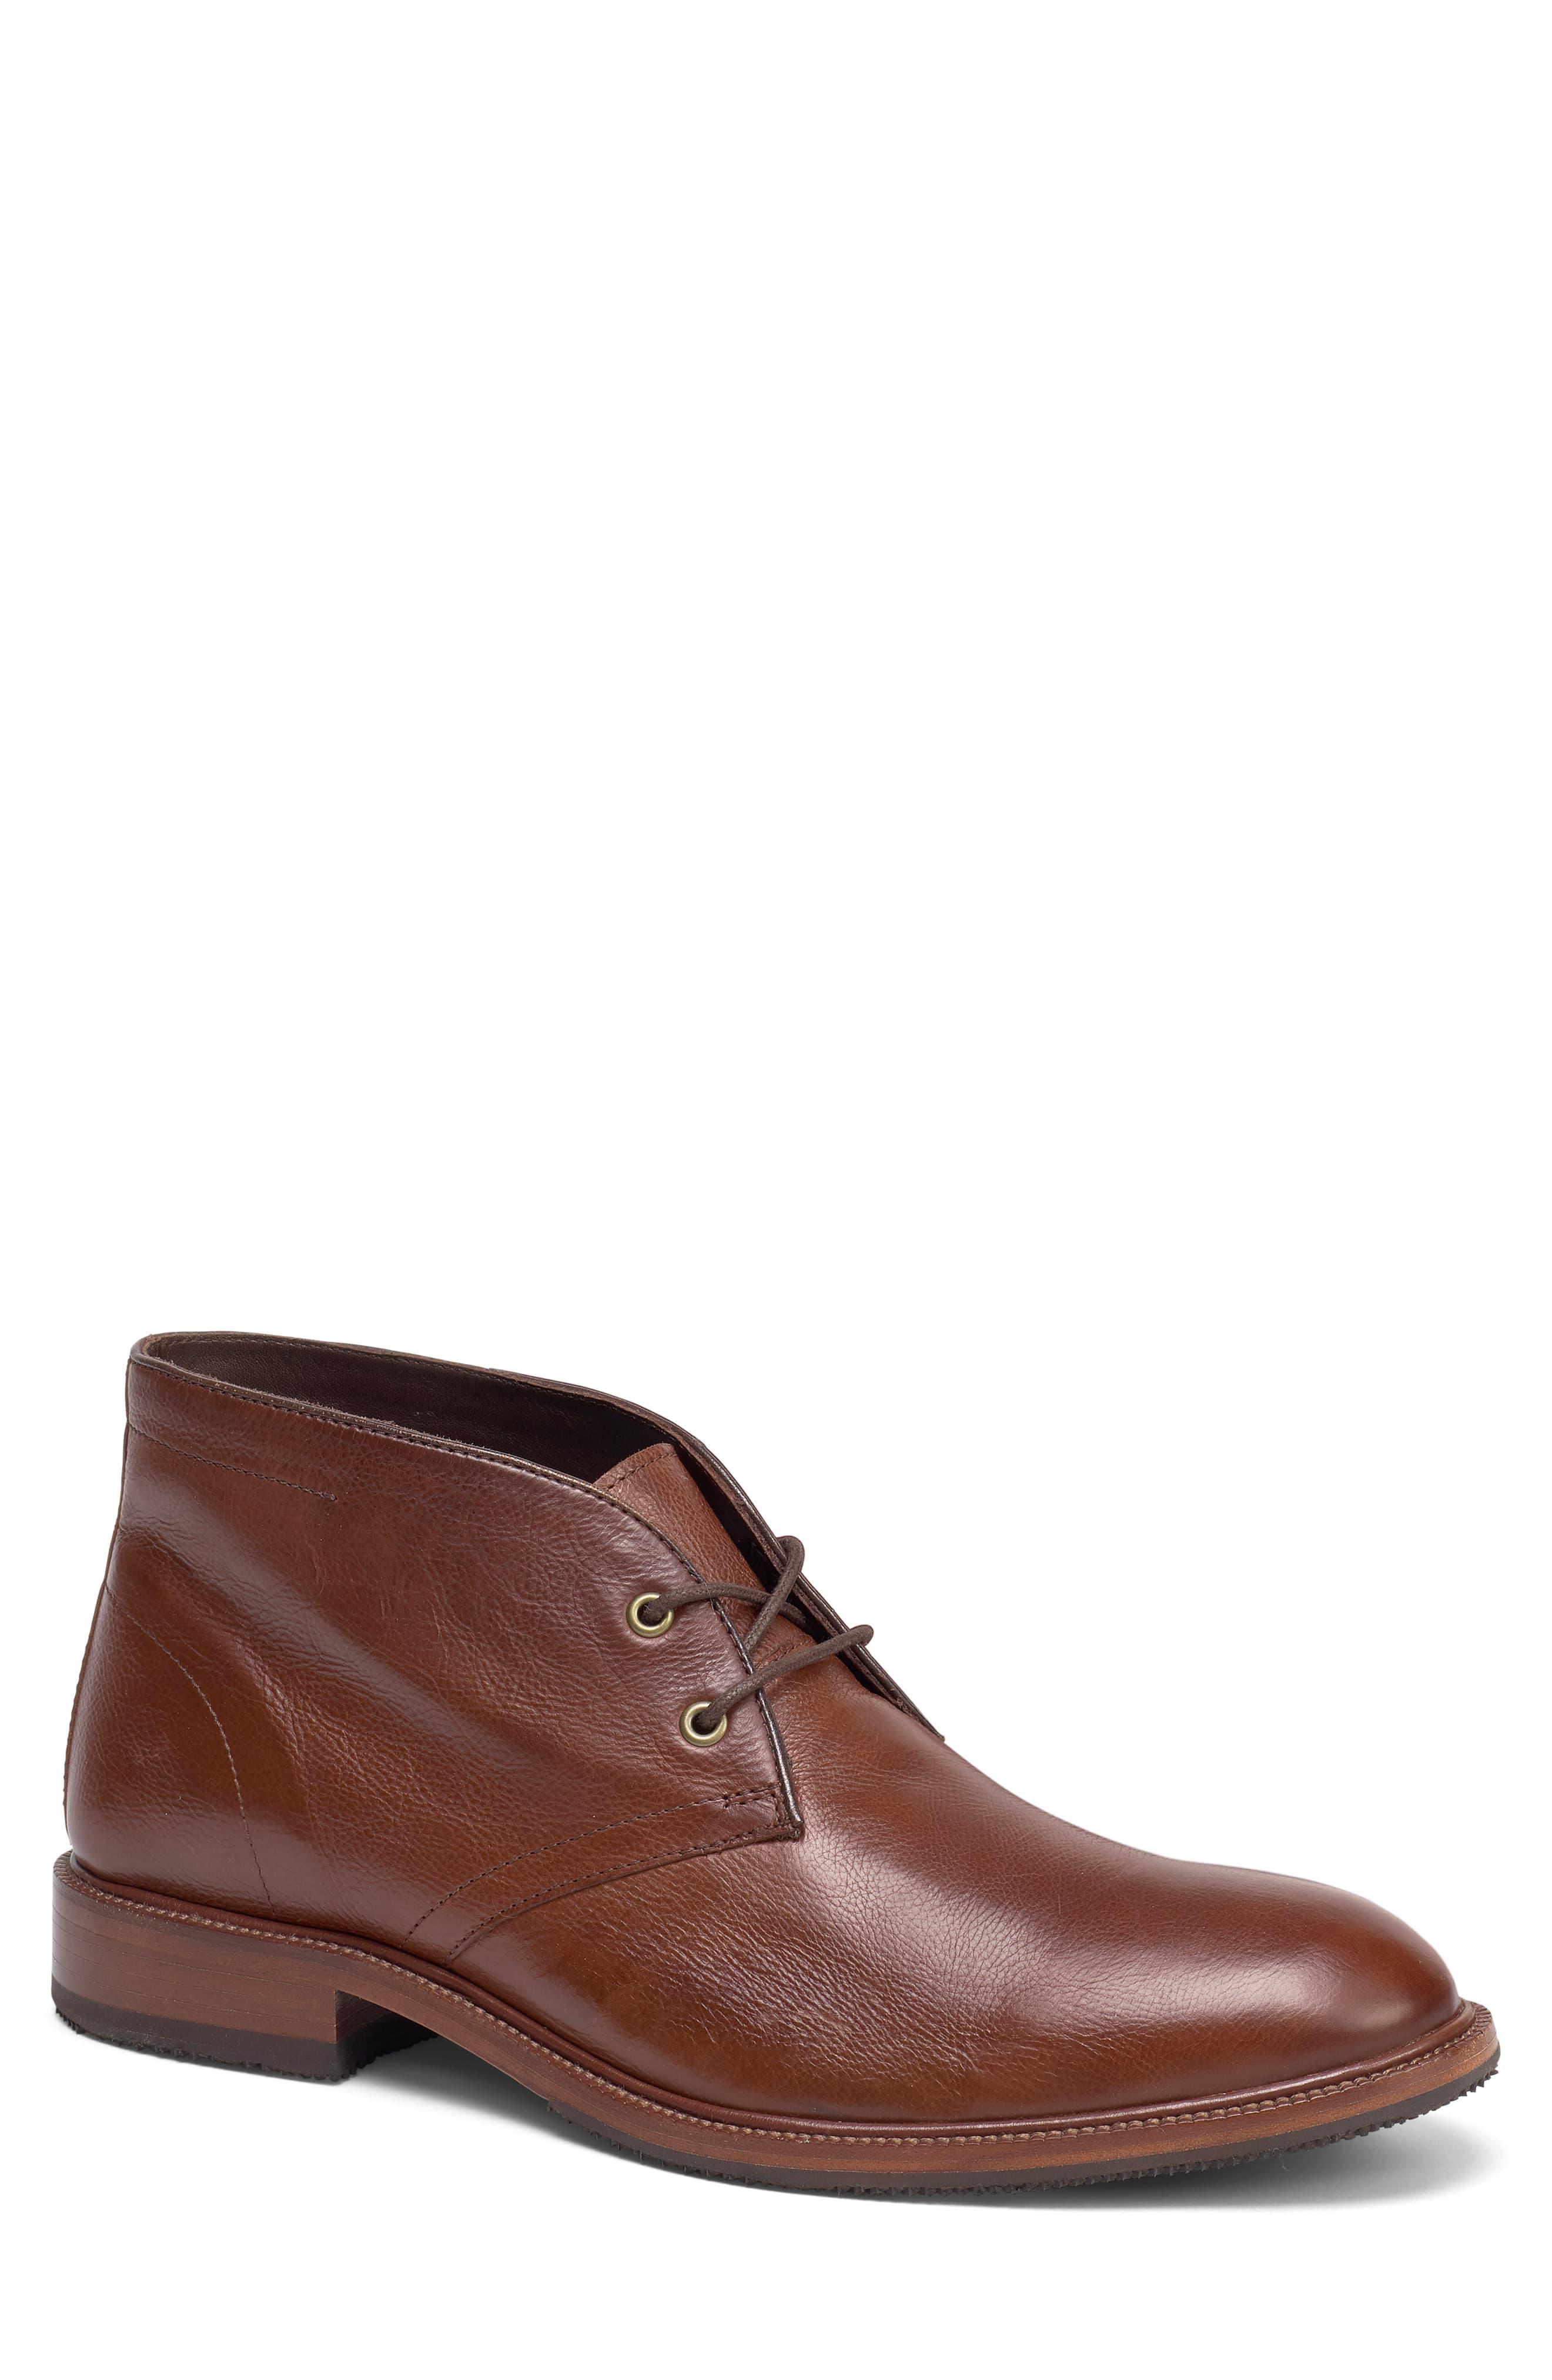 Trask Landers Chukka Boot in Brown Leather (Brown) for Men - Lyst